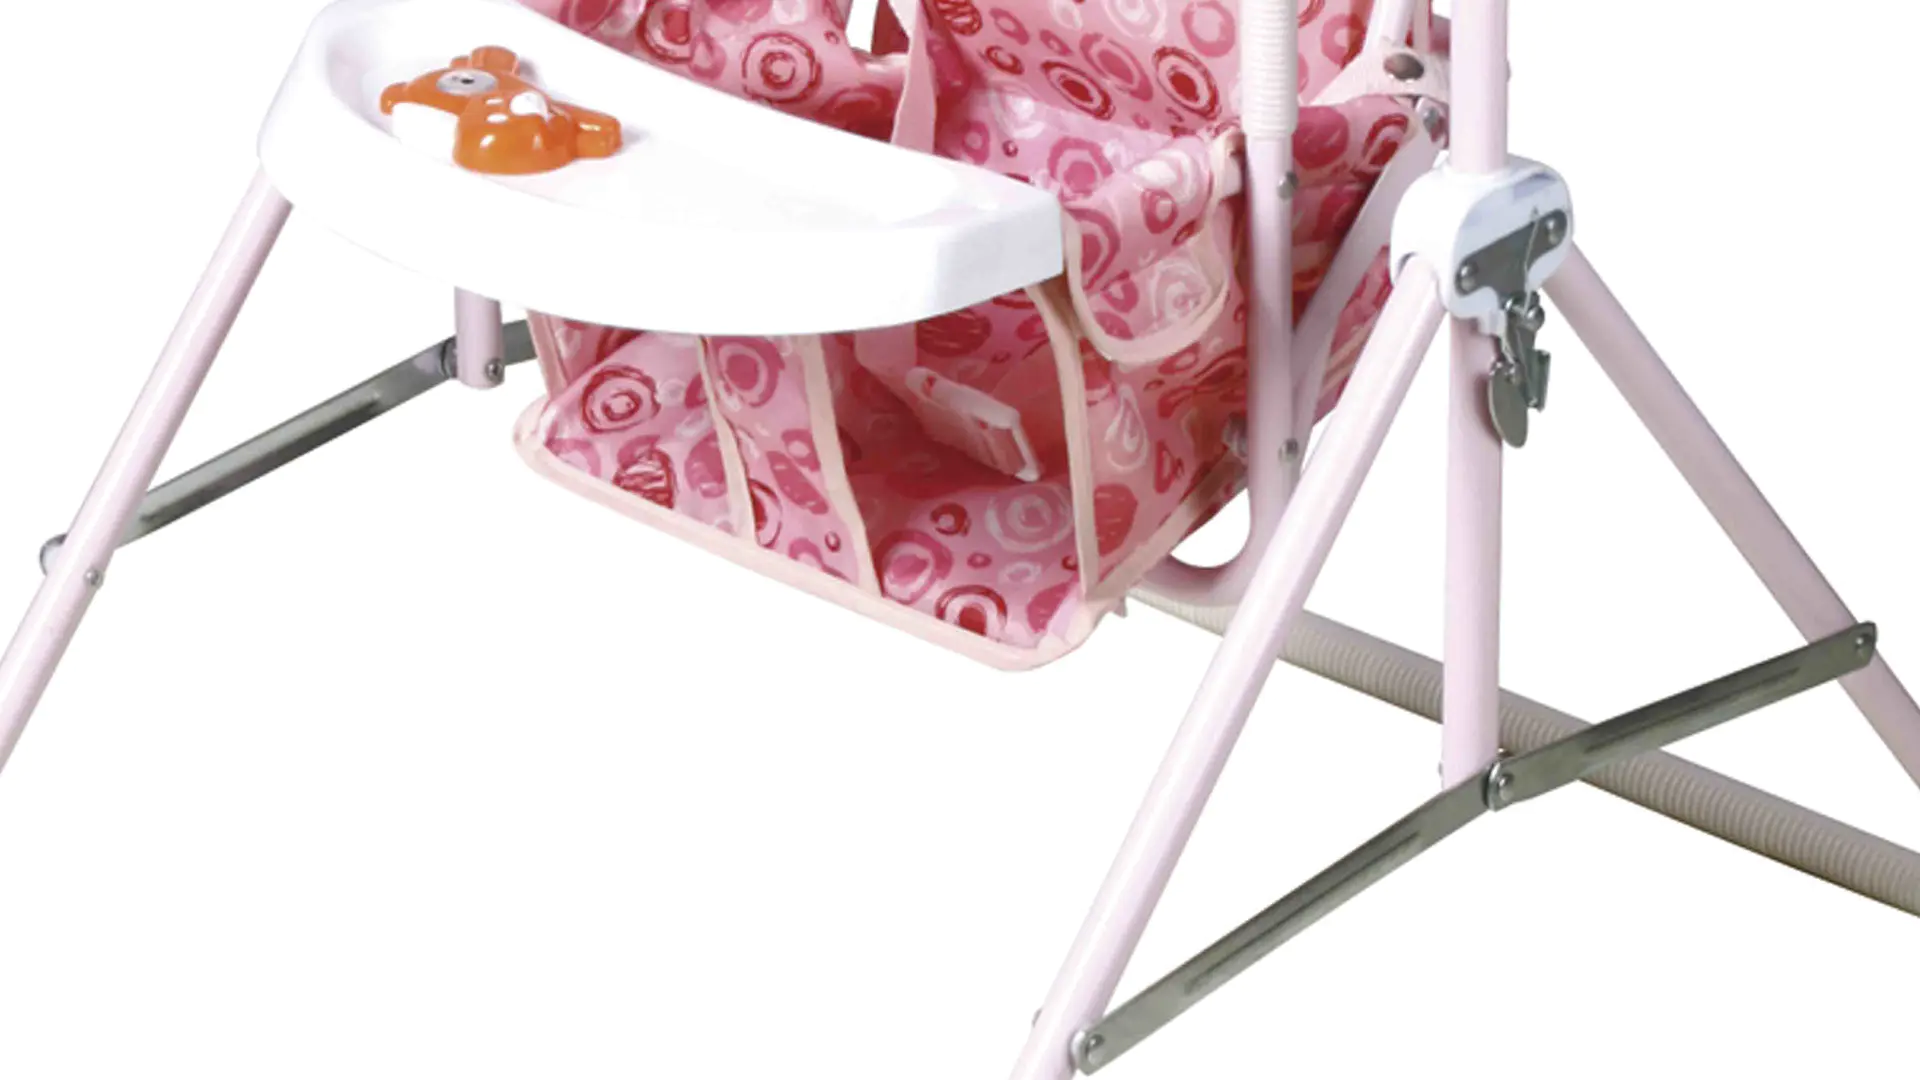 Swing chair for baby with canopy and music tray 310